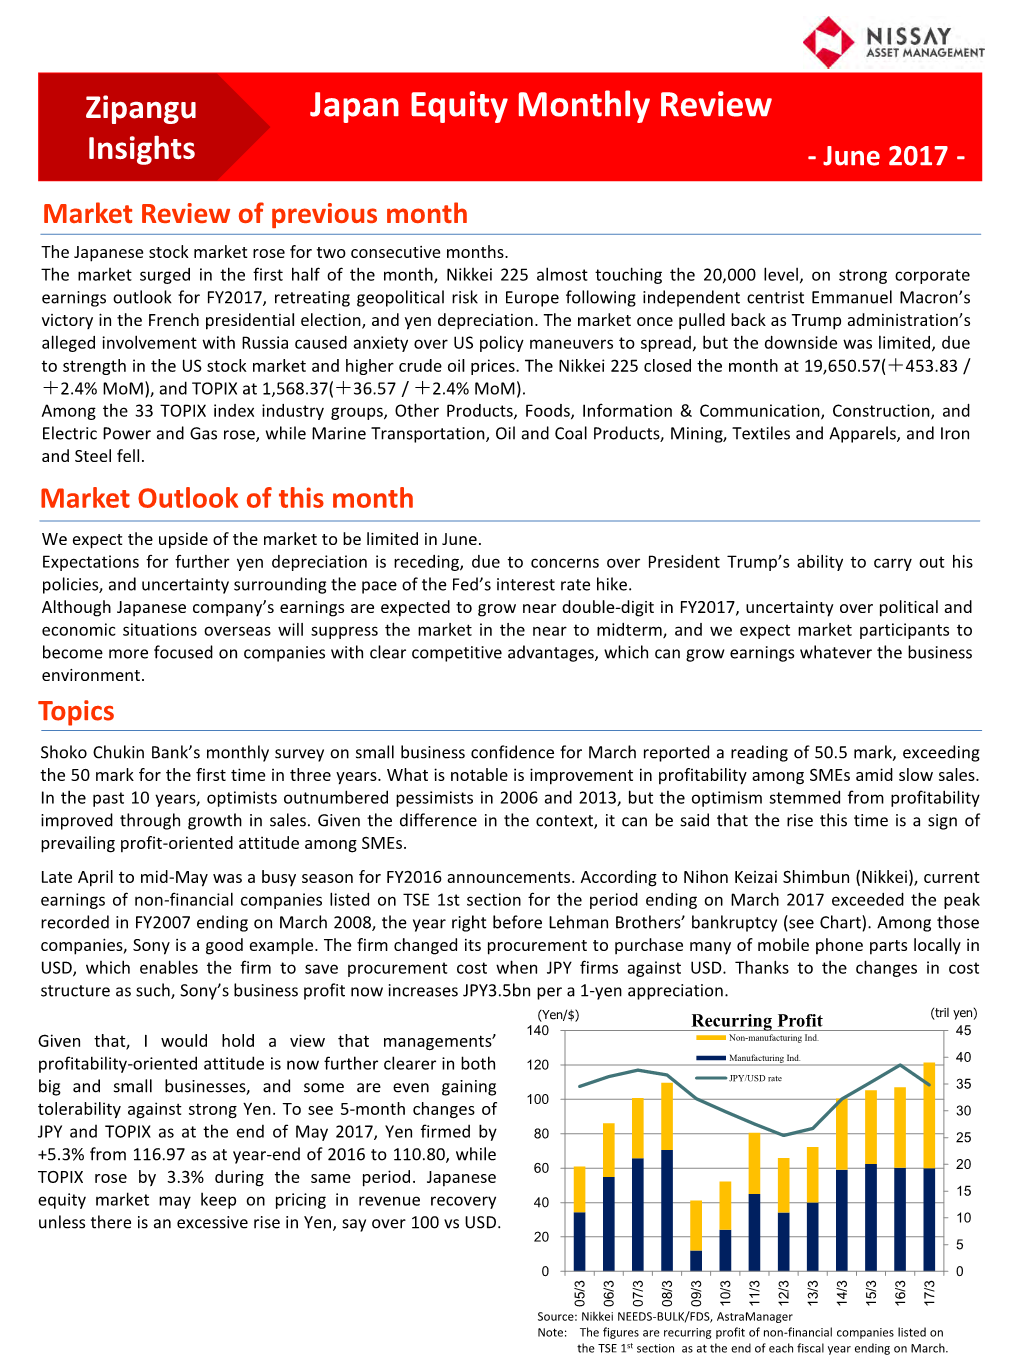 Japan Equity Monthly Review Insights - June 2017 - Market Review of Previous Month the Japanese Stock Market Rose for Two Consecutive Months